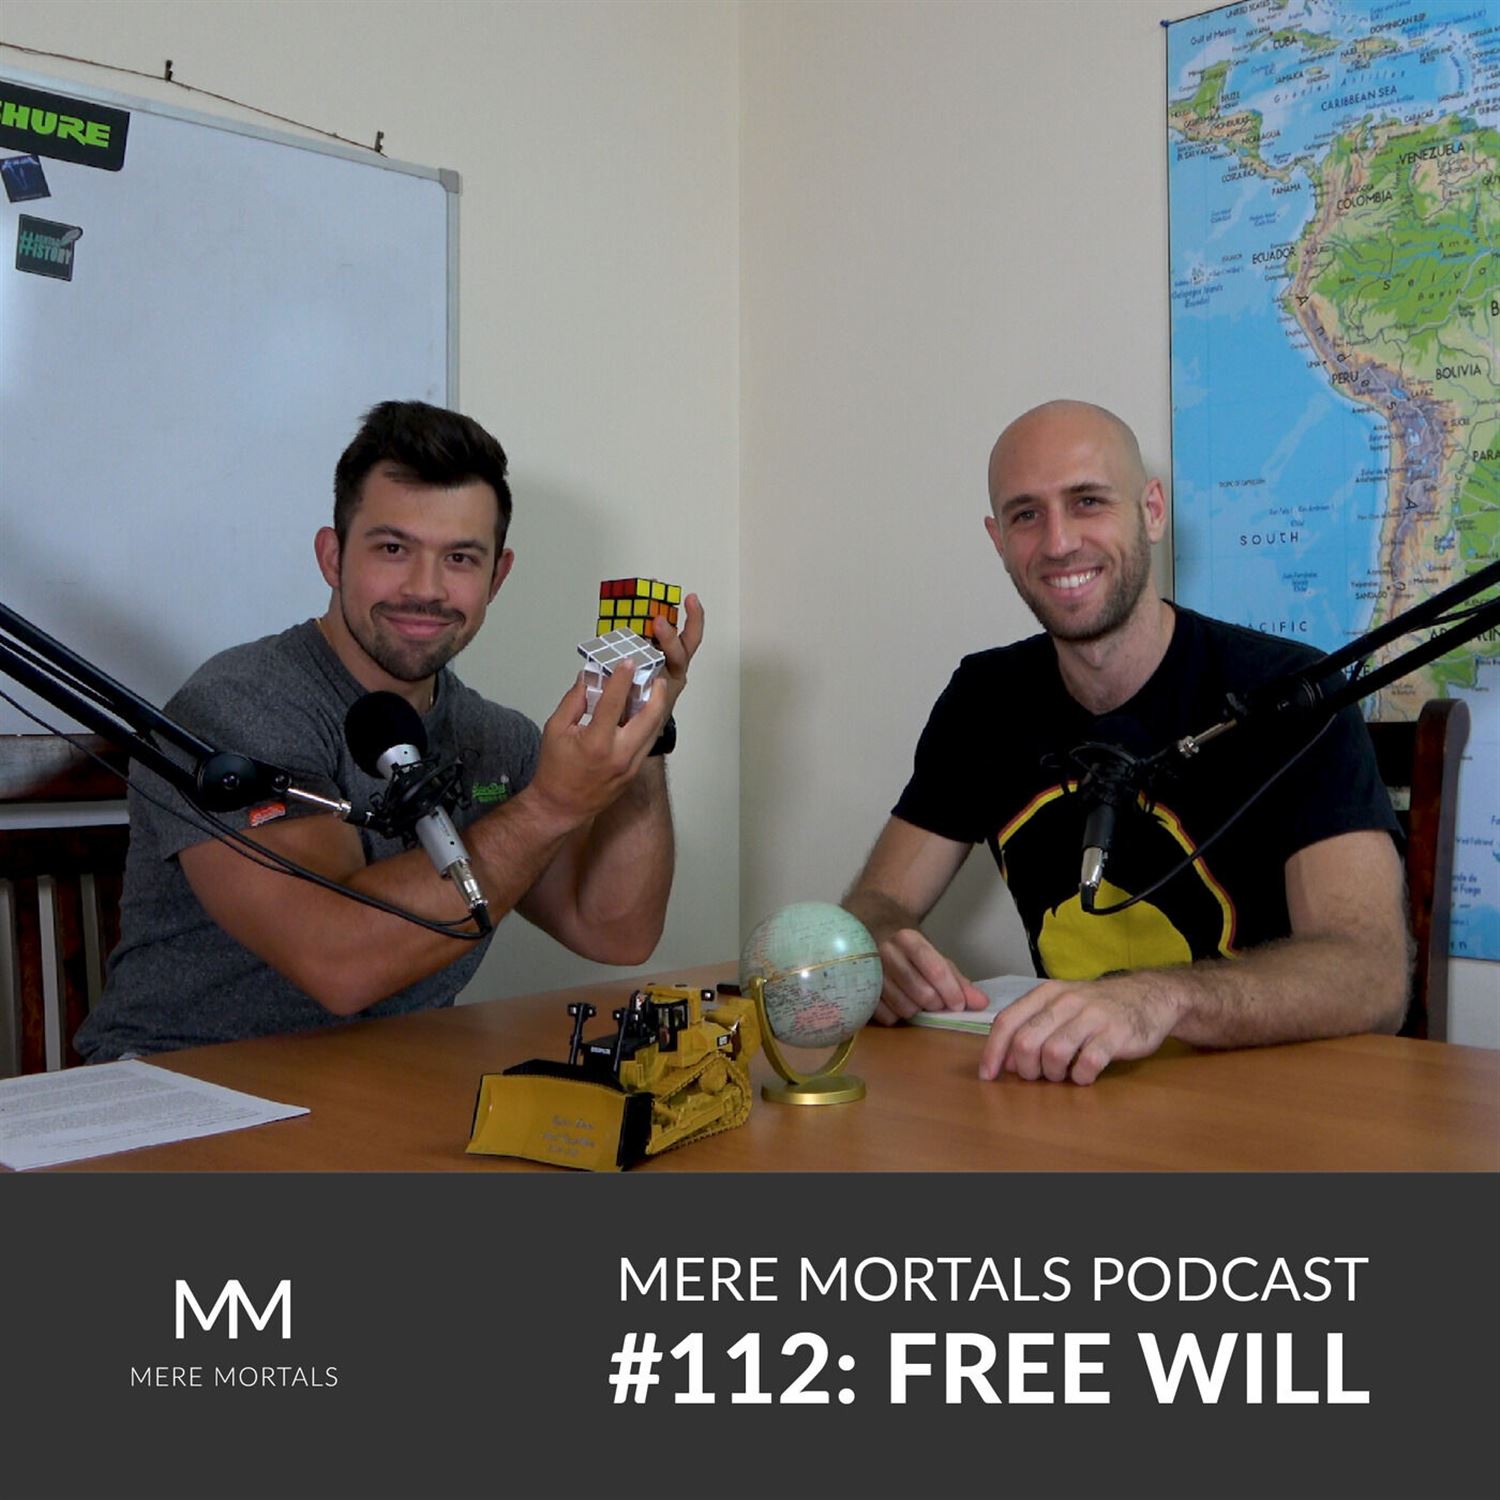 Do Humans Have Free Will? (Episode #112 - Free Will)